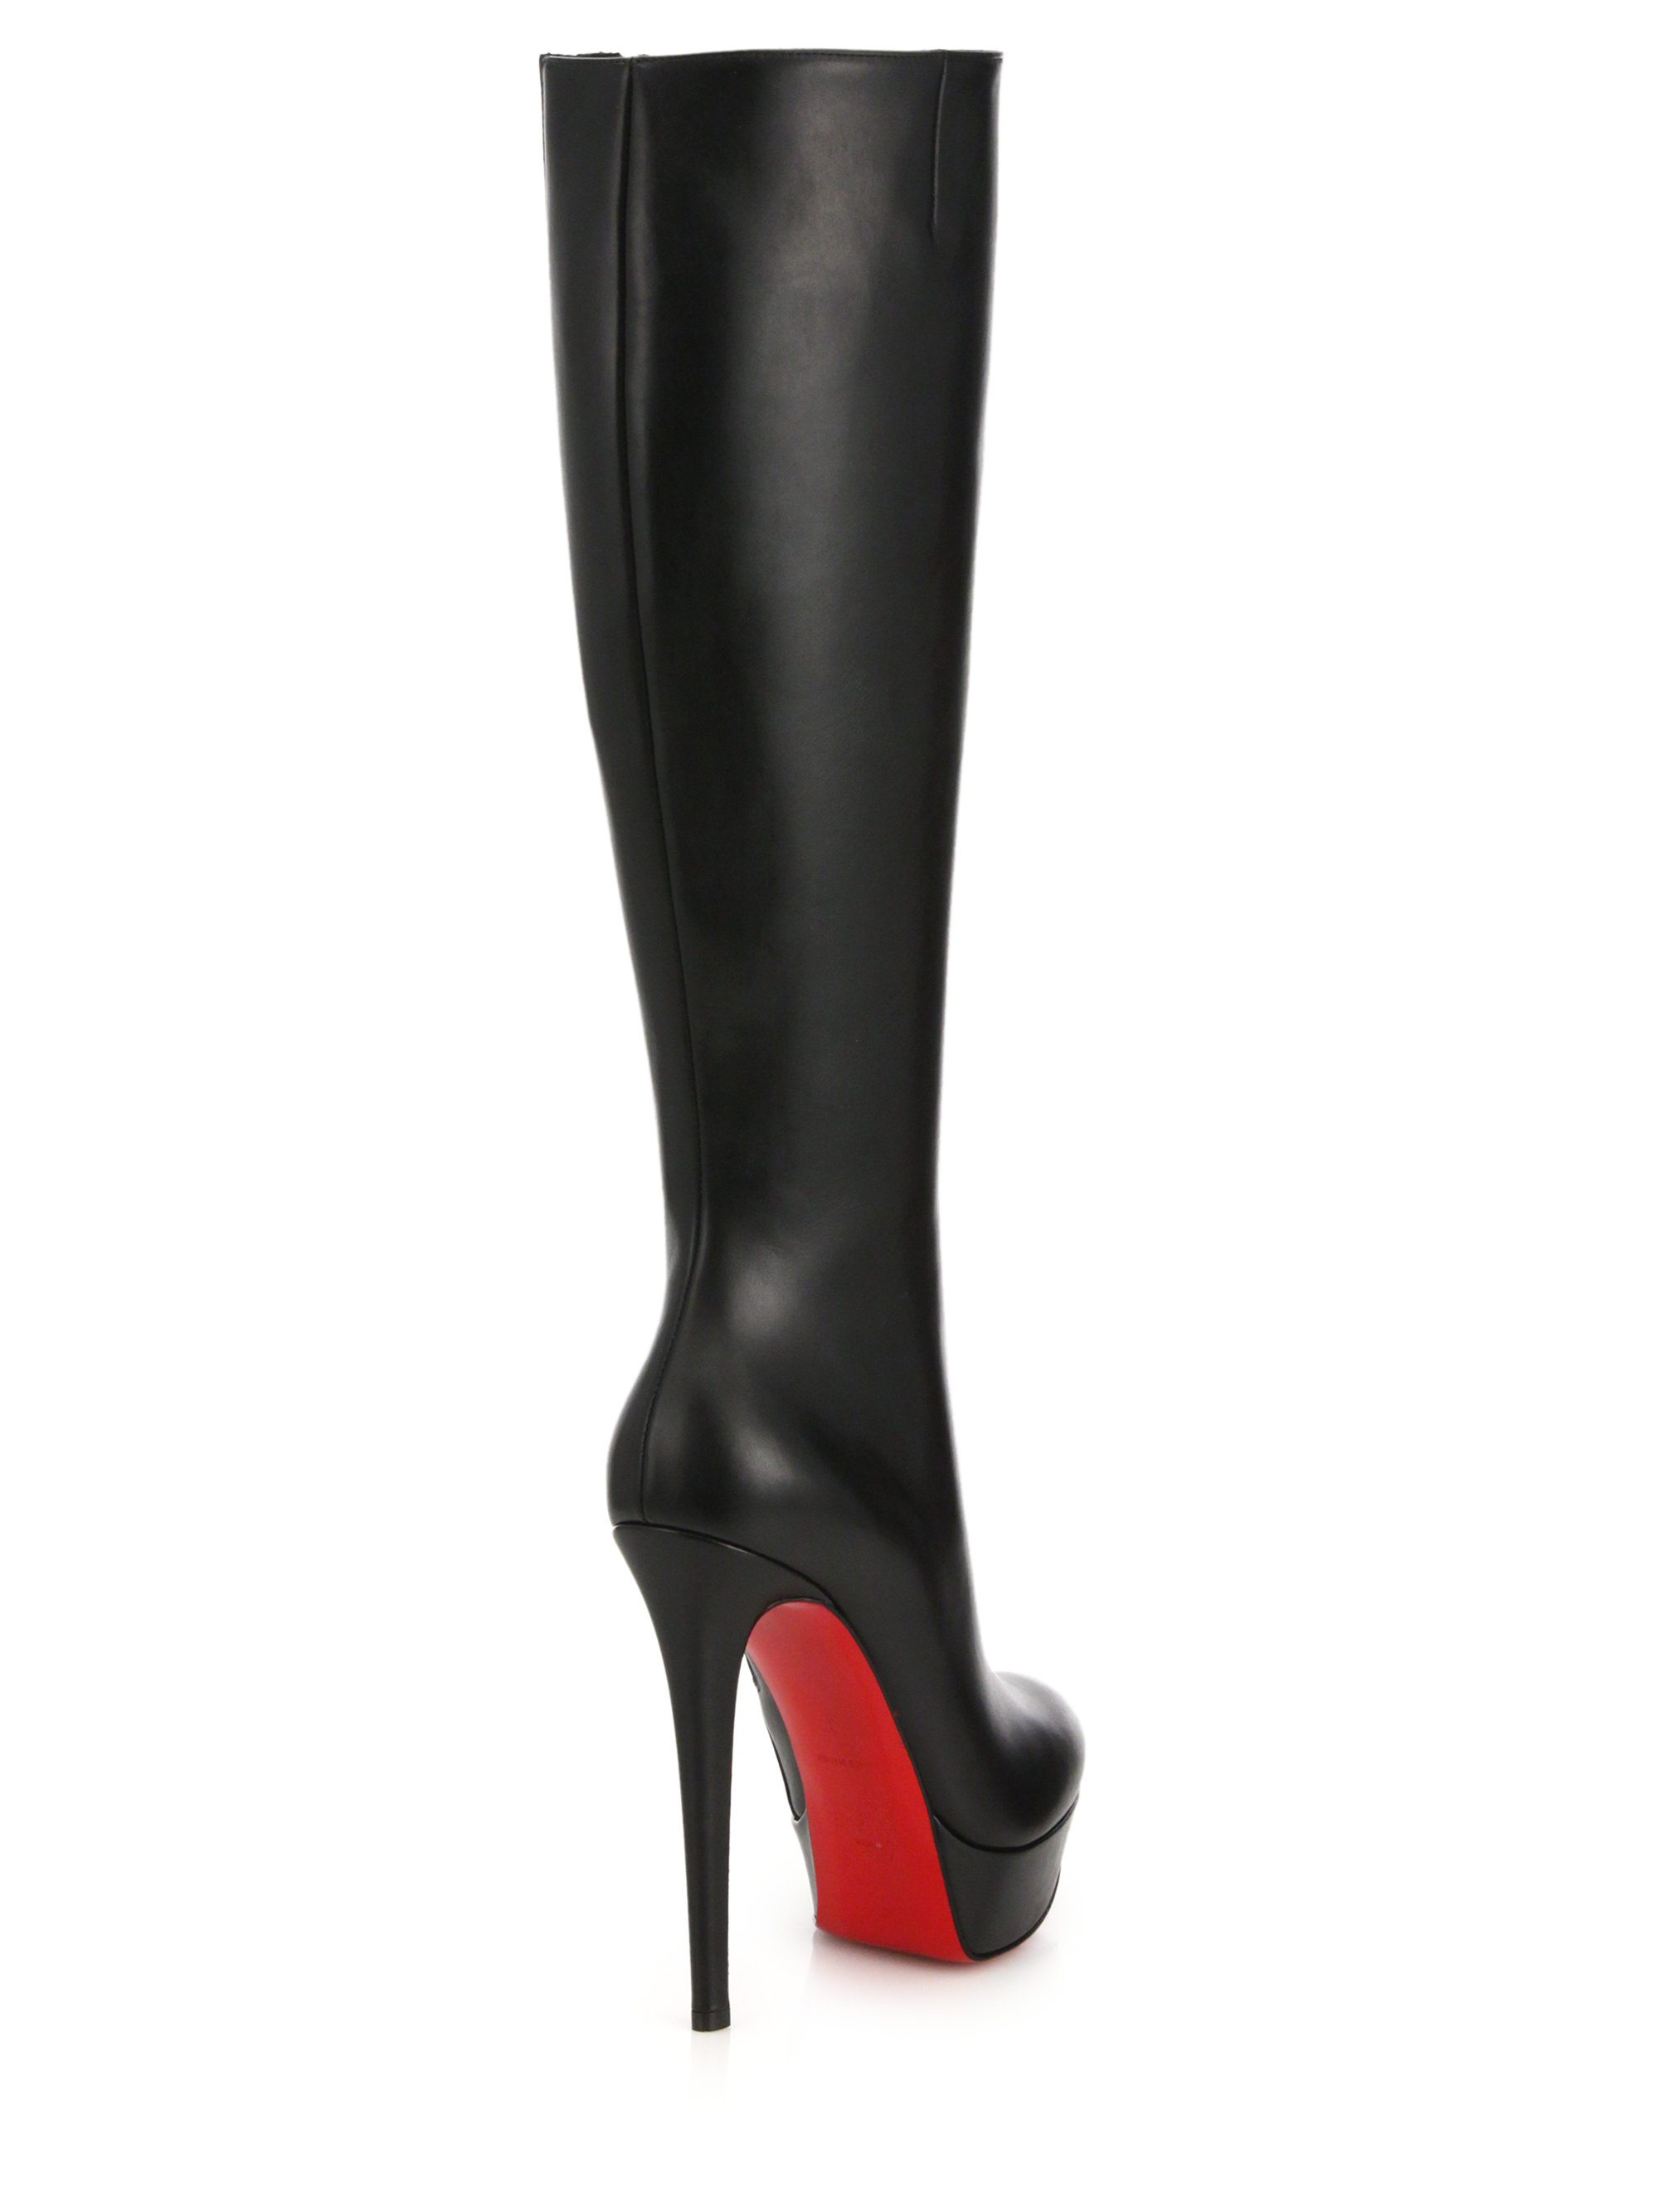 Lyst Christian Louboutin Bianca Leather Knee High Boots In Black